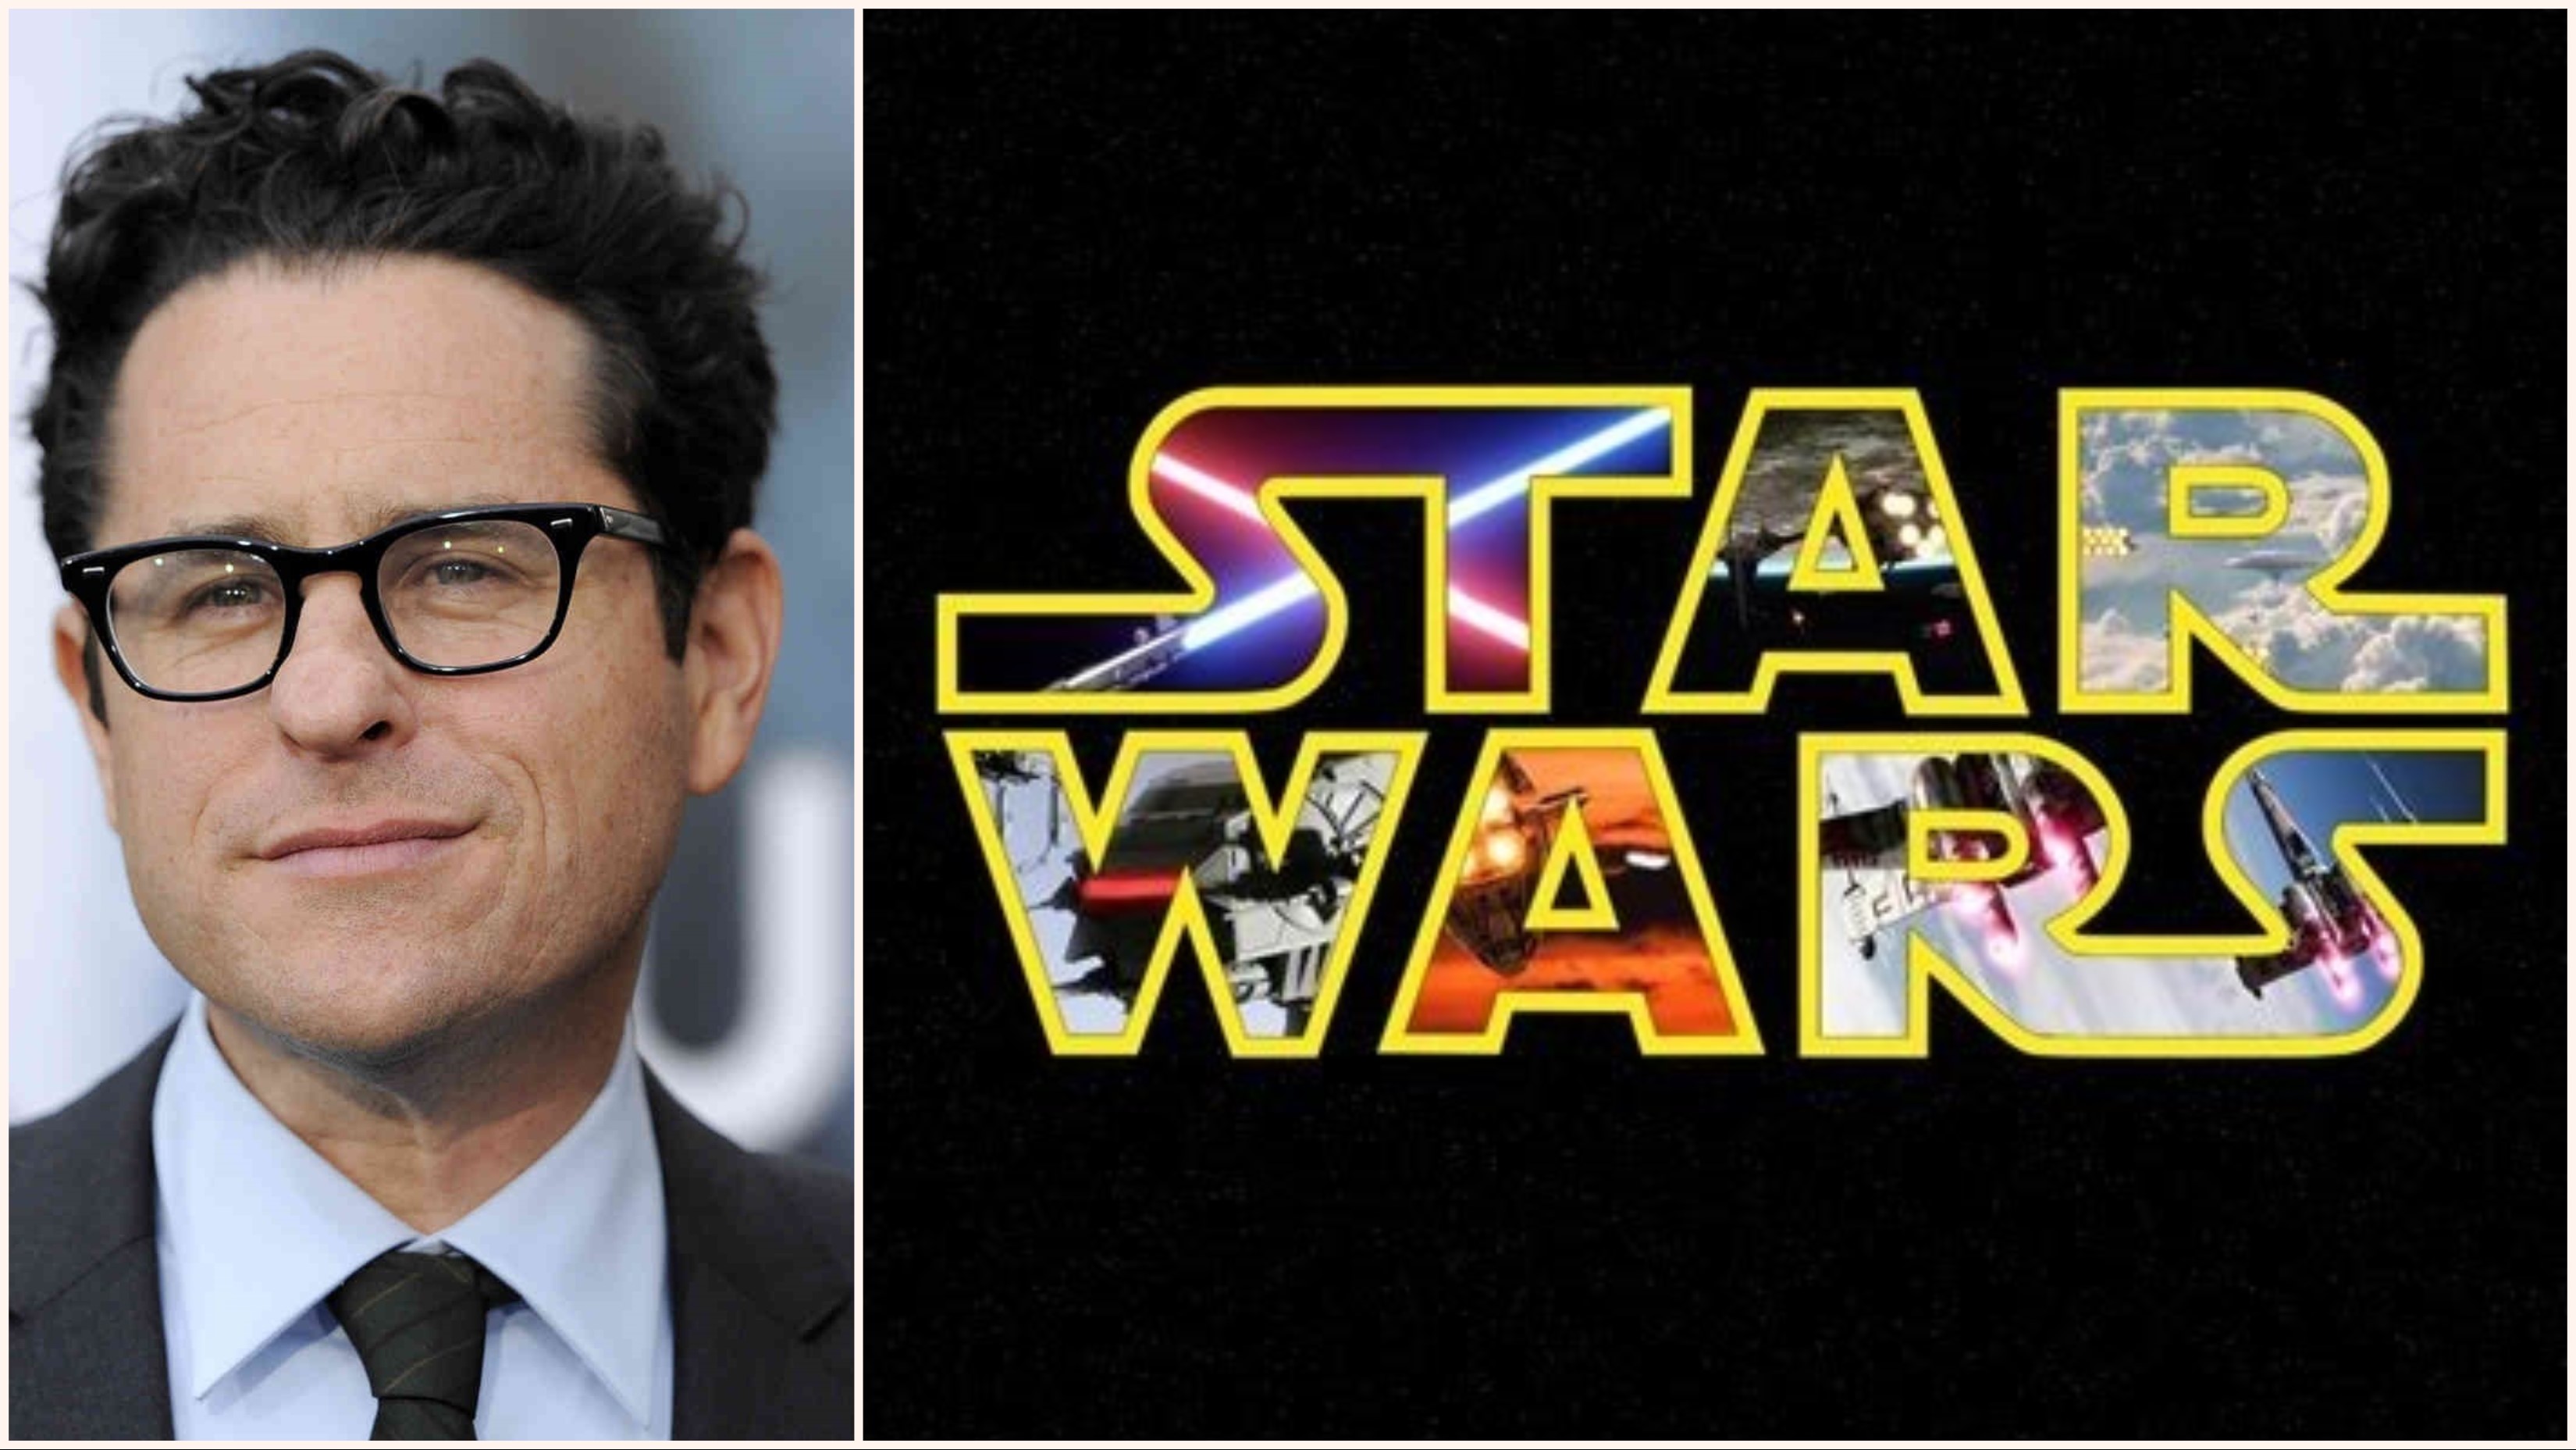 Star Wars: Episode IX is reportedly seen as a "course correction" for Lucasfilm after their recent efforts, which displeased much of the audience.